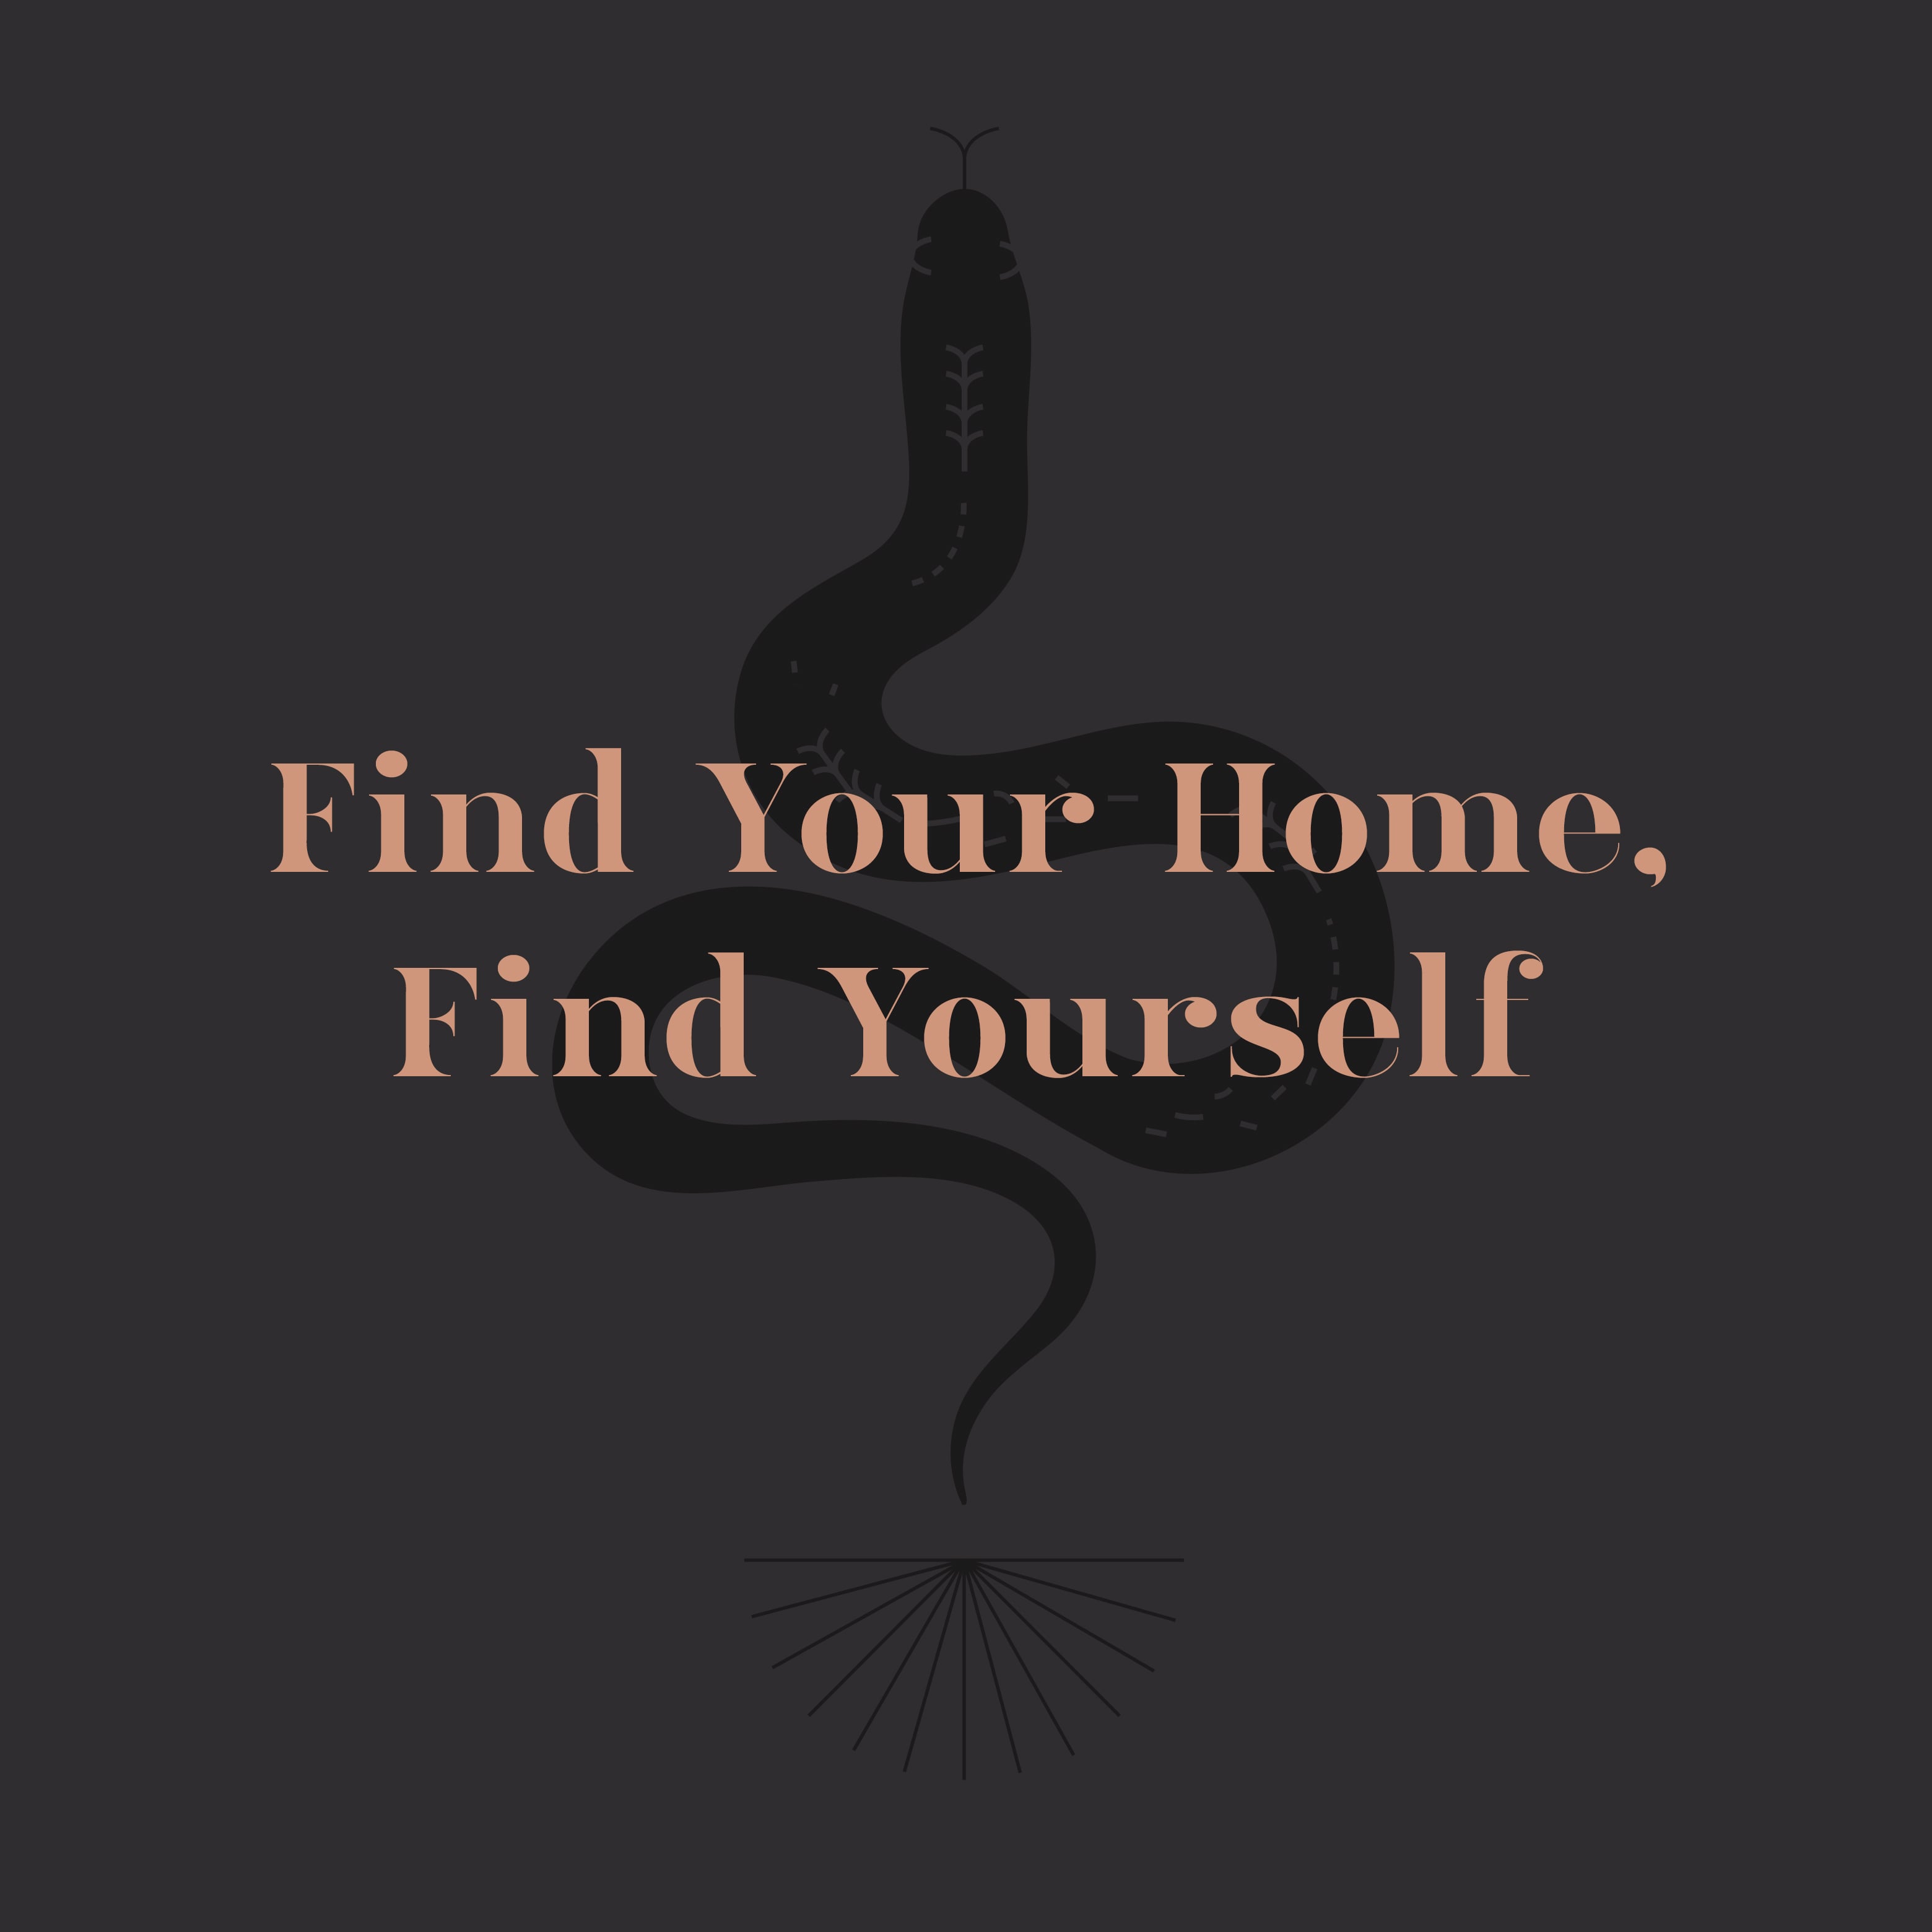 Amy Sparks Positioning statement: Find Your Home, Find Yourself